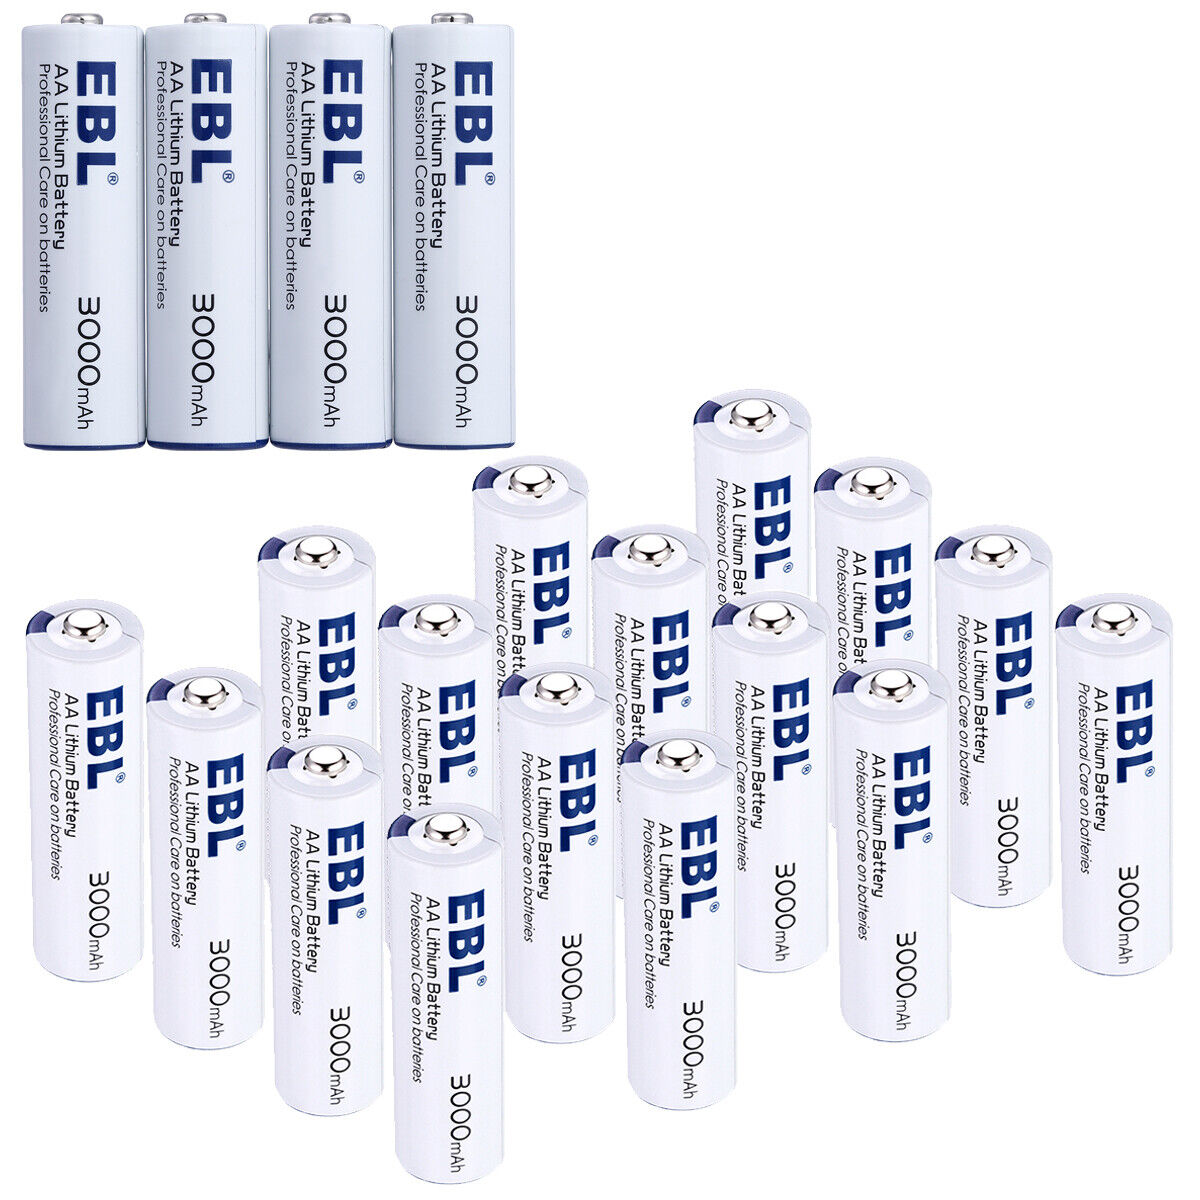 20x 3000mAh 1.5V AA Lithium Batteries Ultimate Non-Rechargeable Lithium Battery